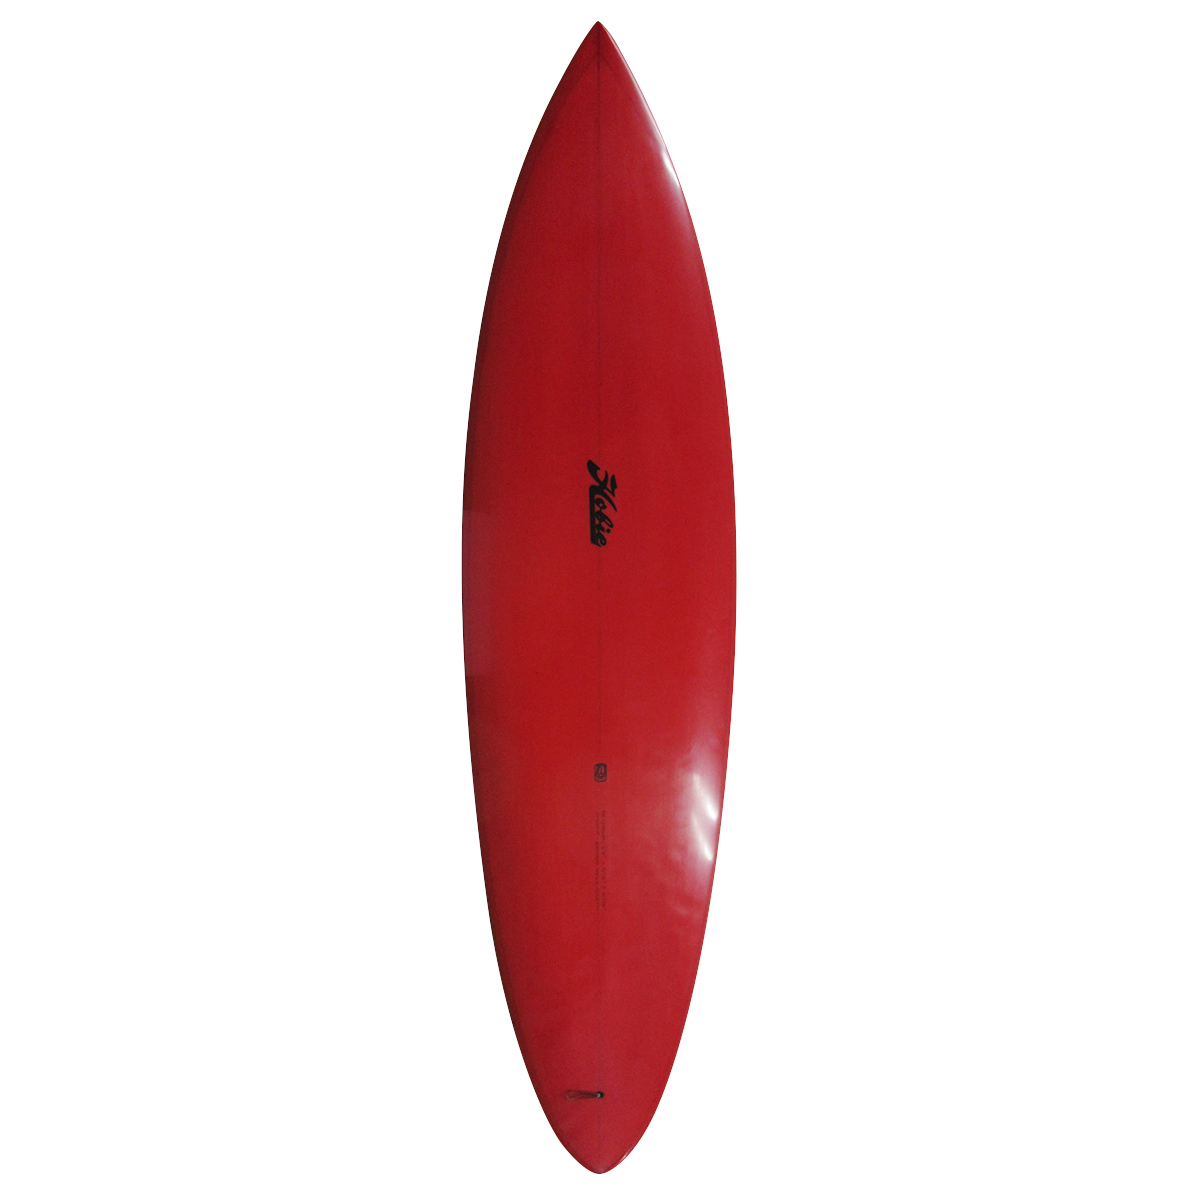 HOBIE / TW CHARGER 6'6 Shaped by Tyler Warren